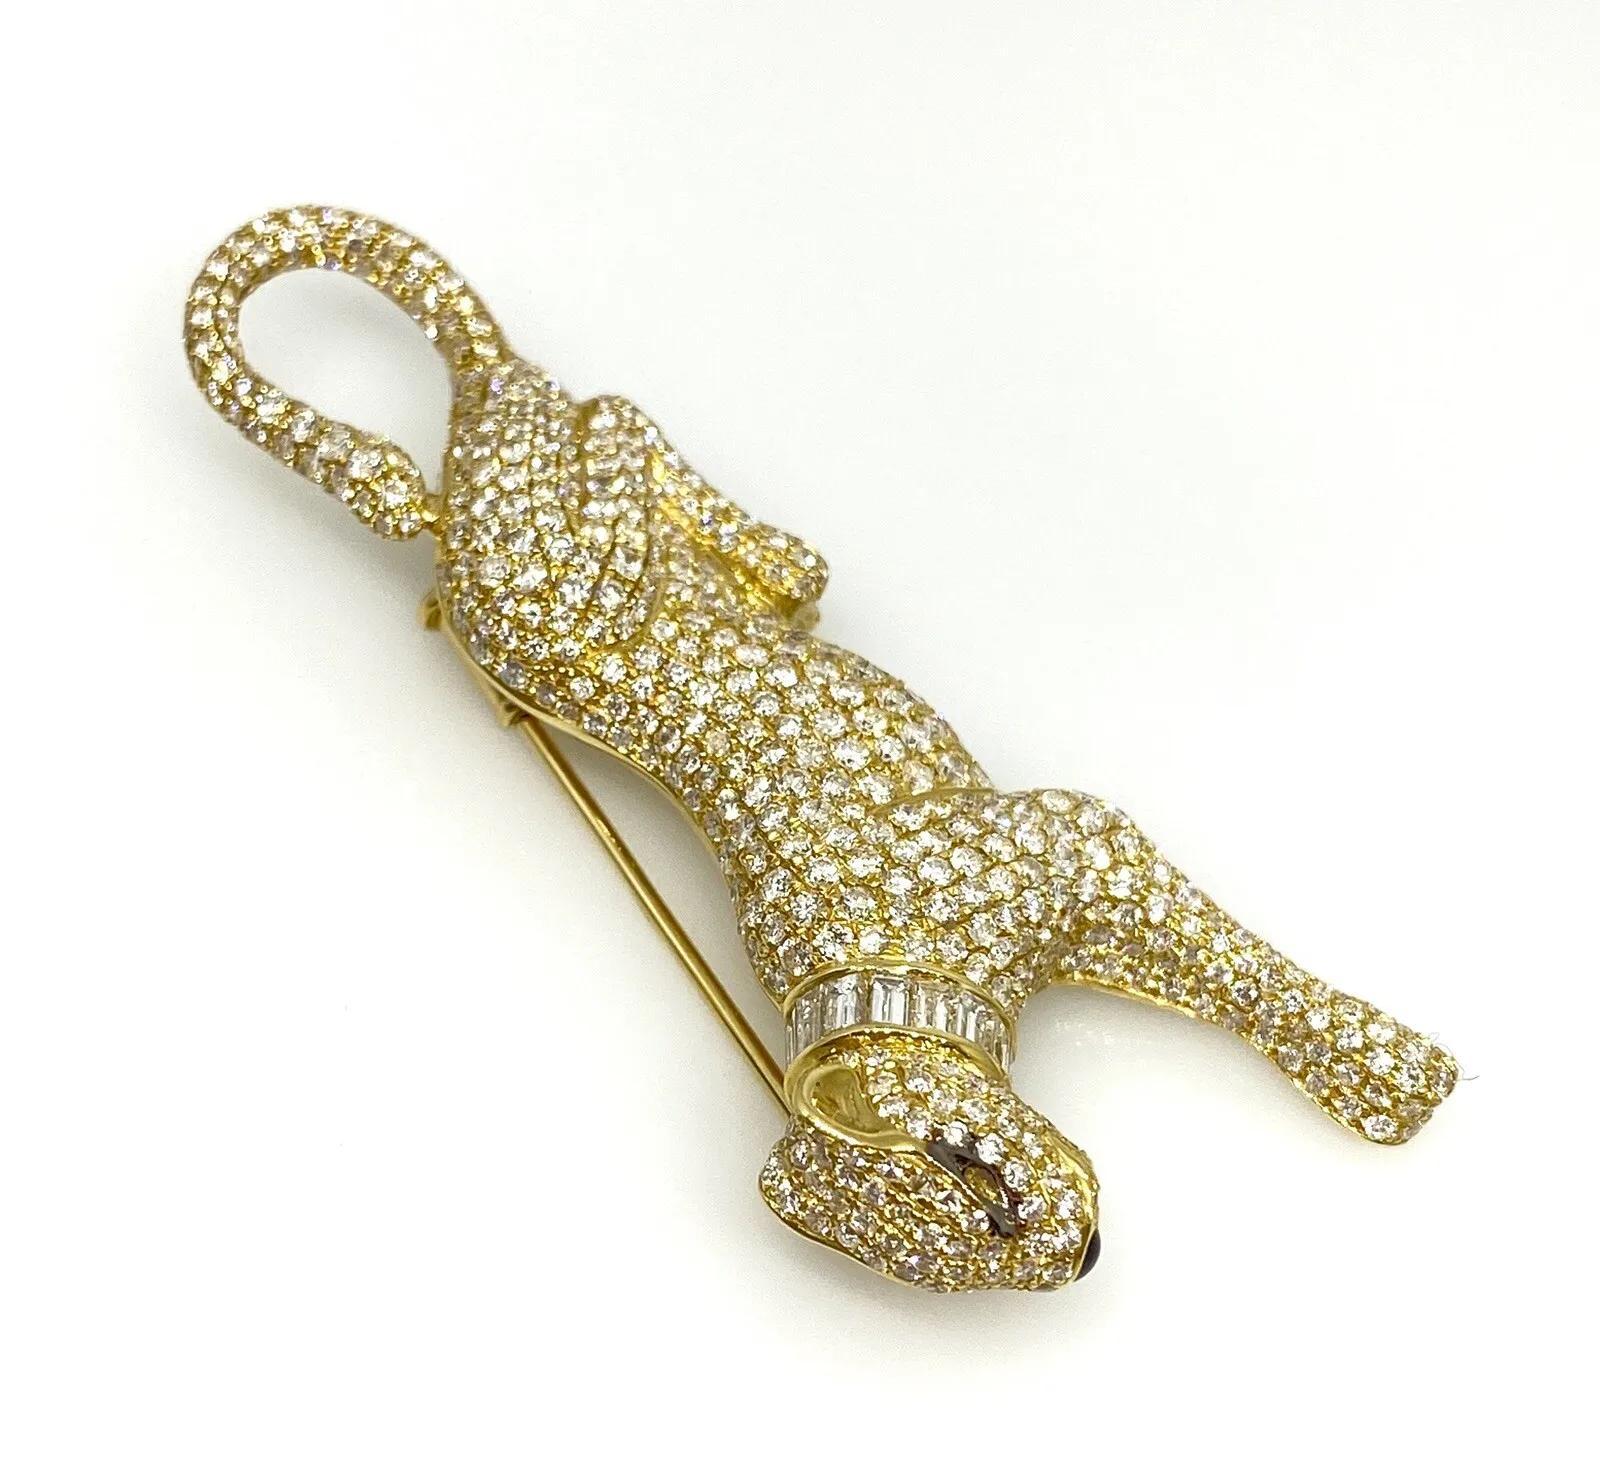 Diamond Panther Brooch with Baguette Collar 4.26 Carat Total Weight in 18k Yellow Gold

Diamond Panther Pin features reclining Panther pavè set with Round Brilliant Diamonds over the entire body, with a Brown Diamond Eye and a Baguette Diamond